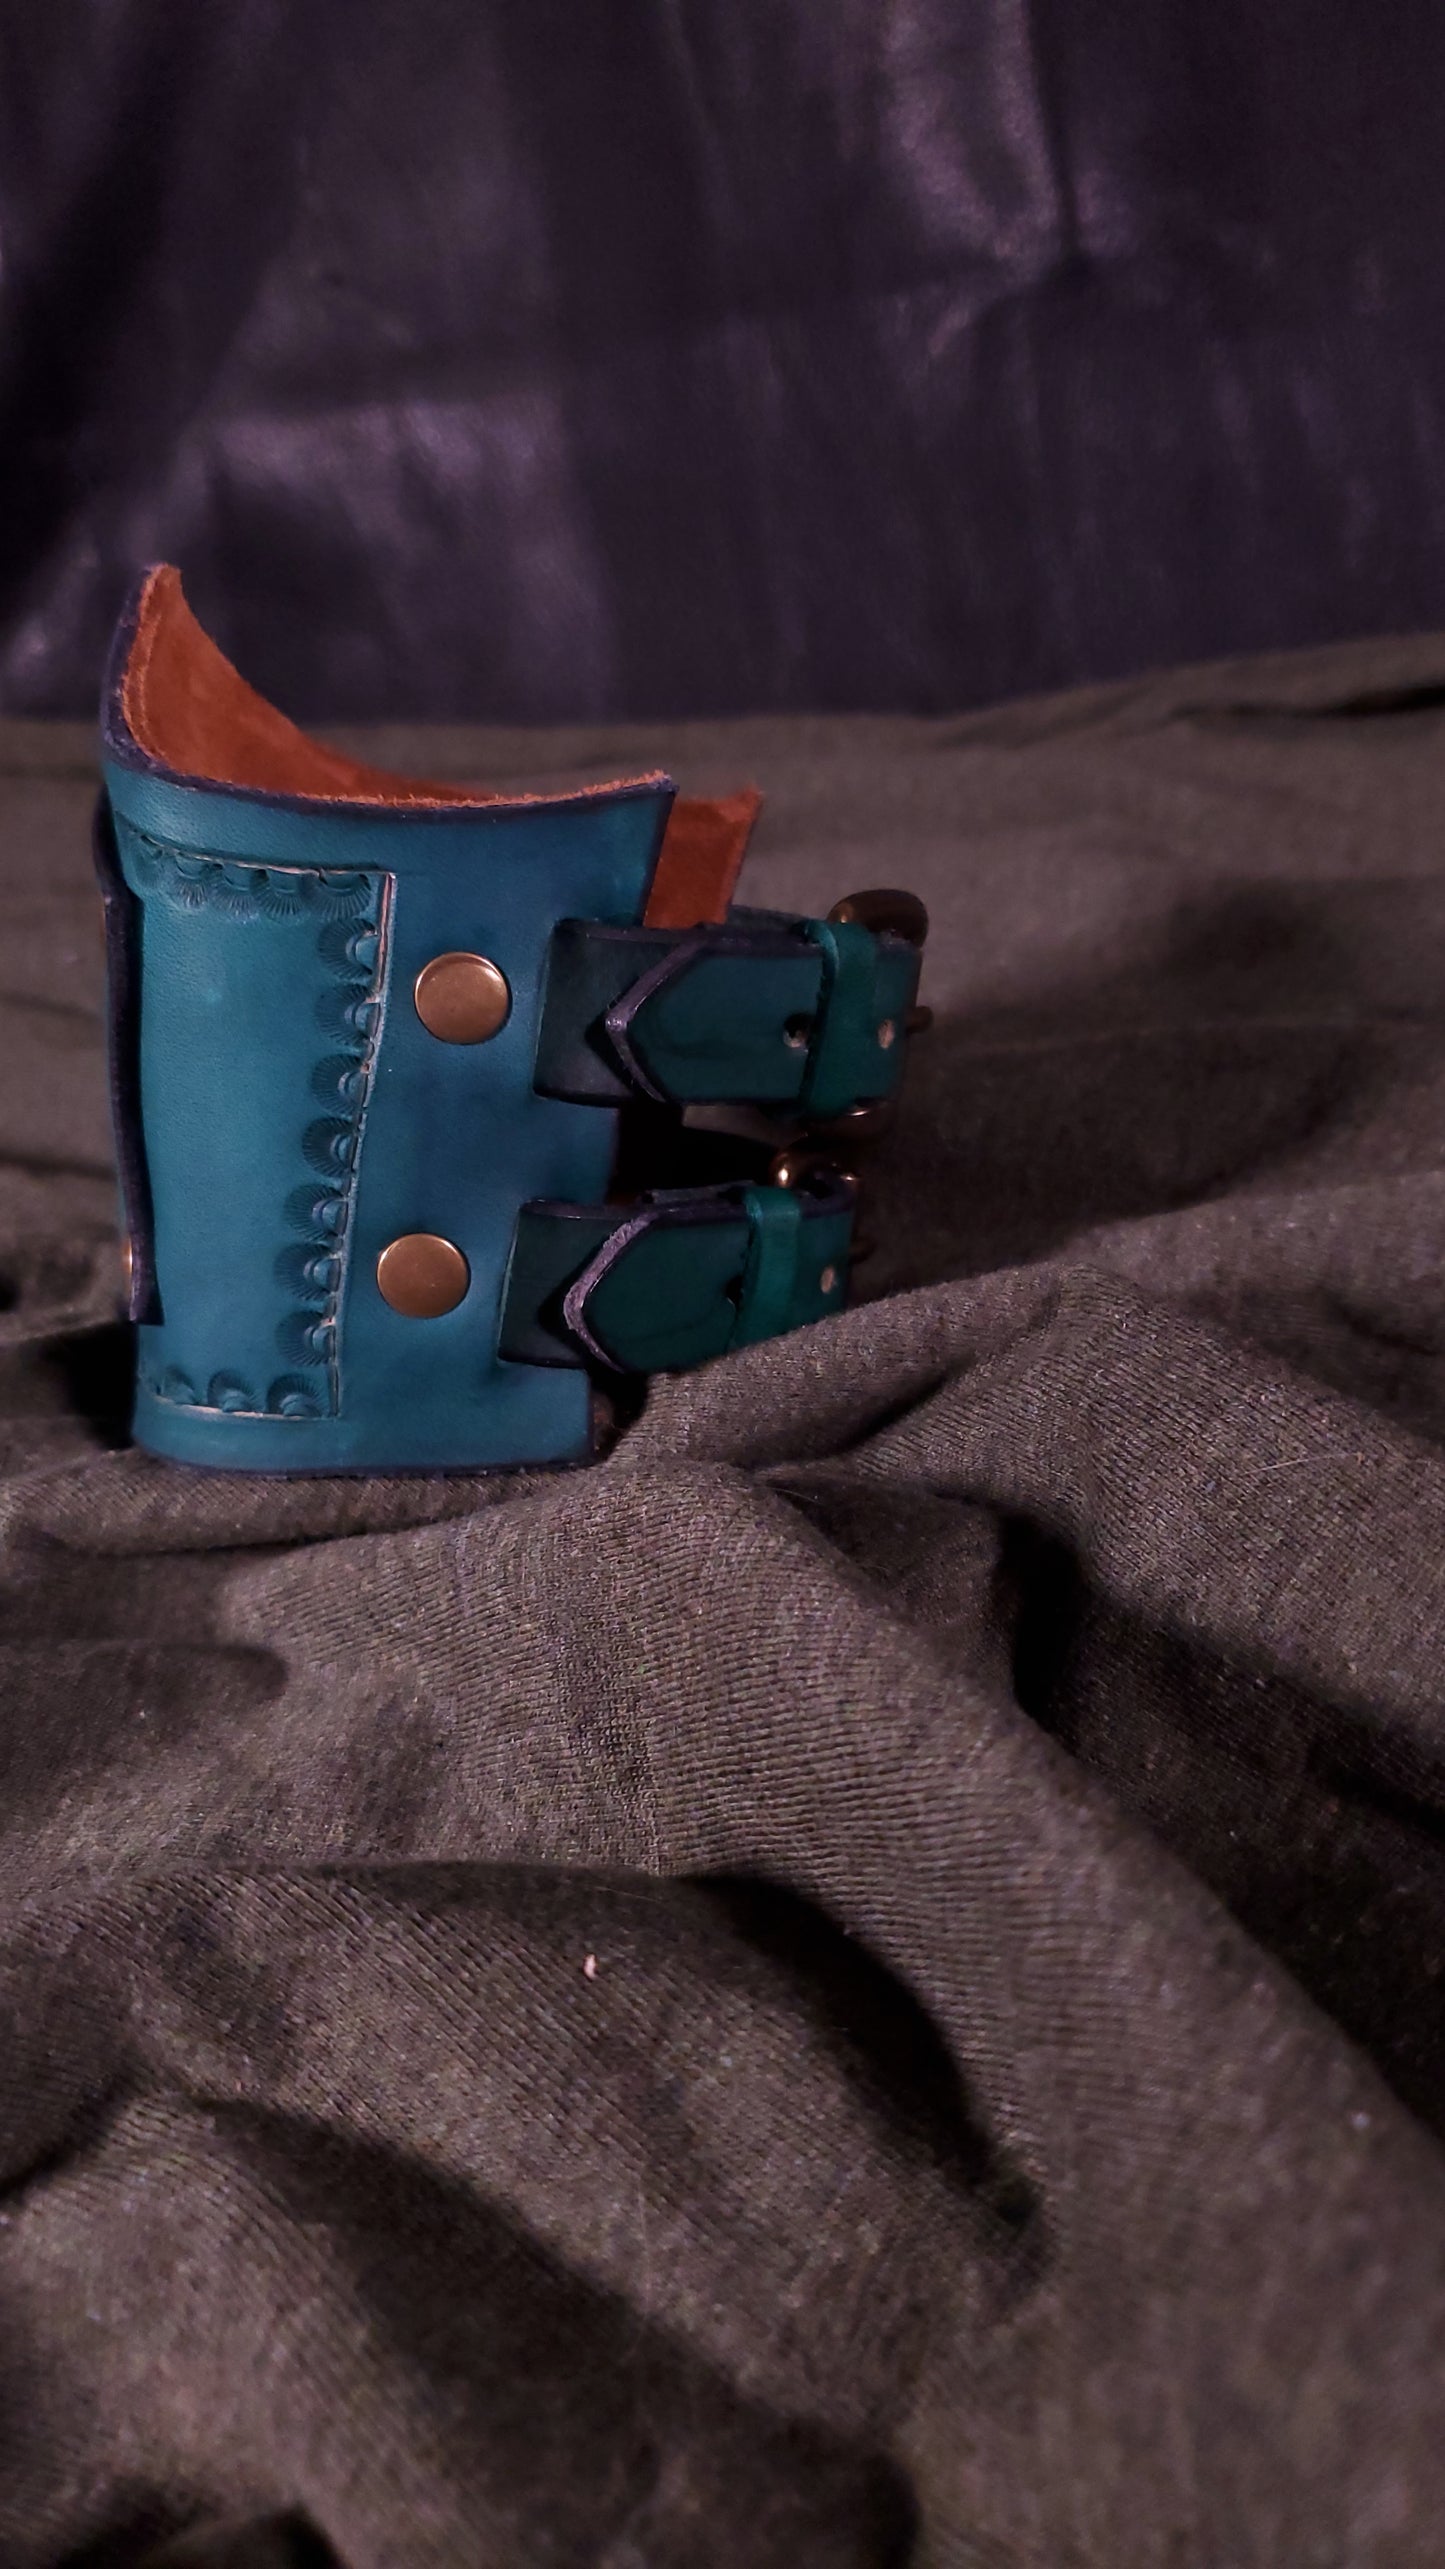 Green Cuff with a panel riveted onto it that has a mjolnir or thors hammer stamped onto it